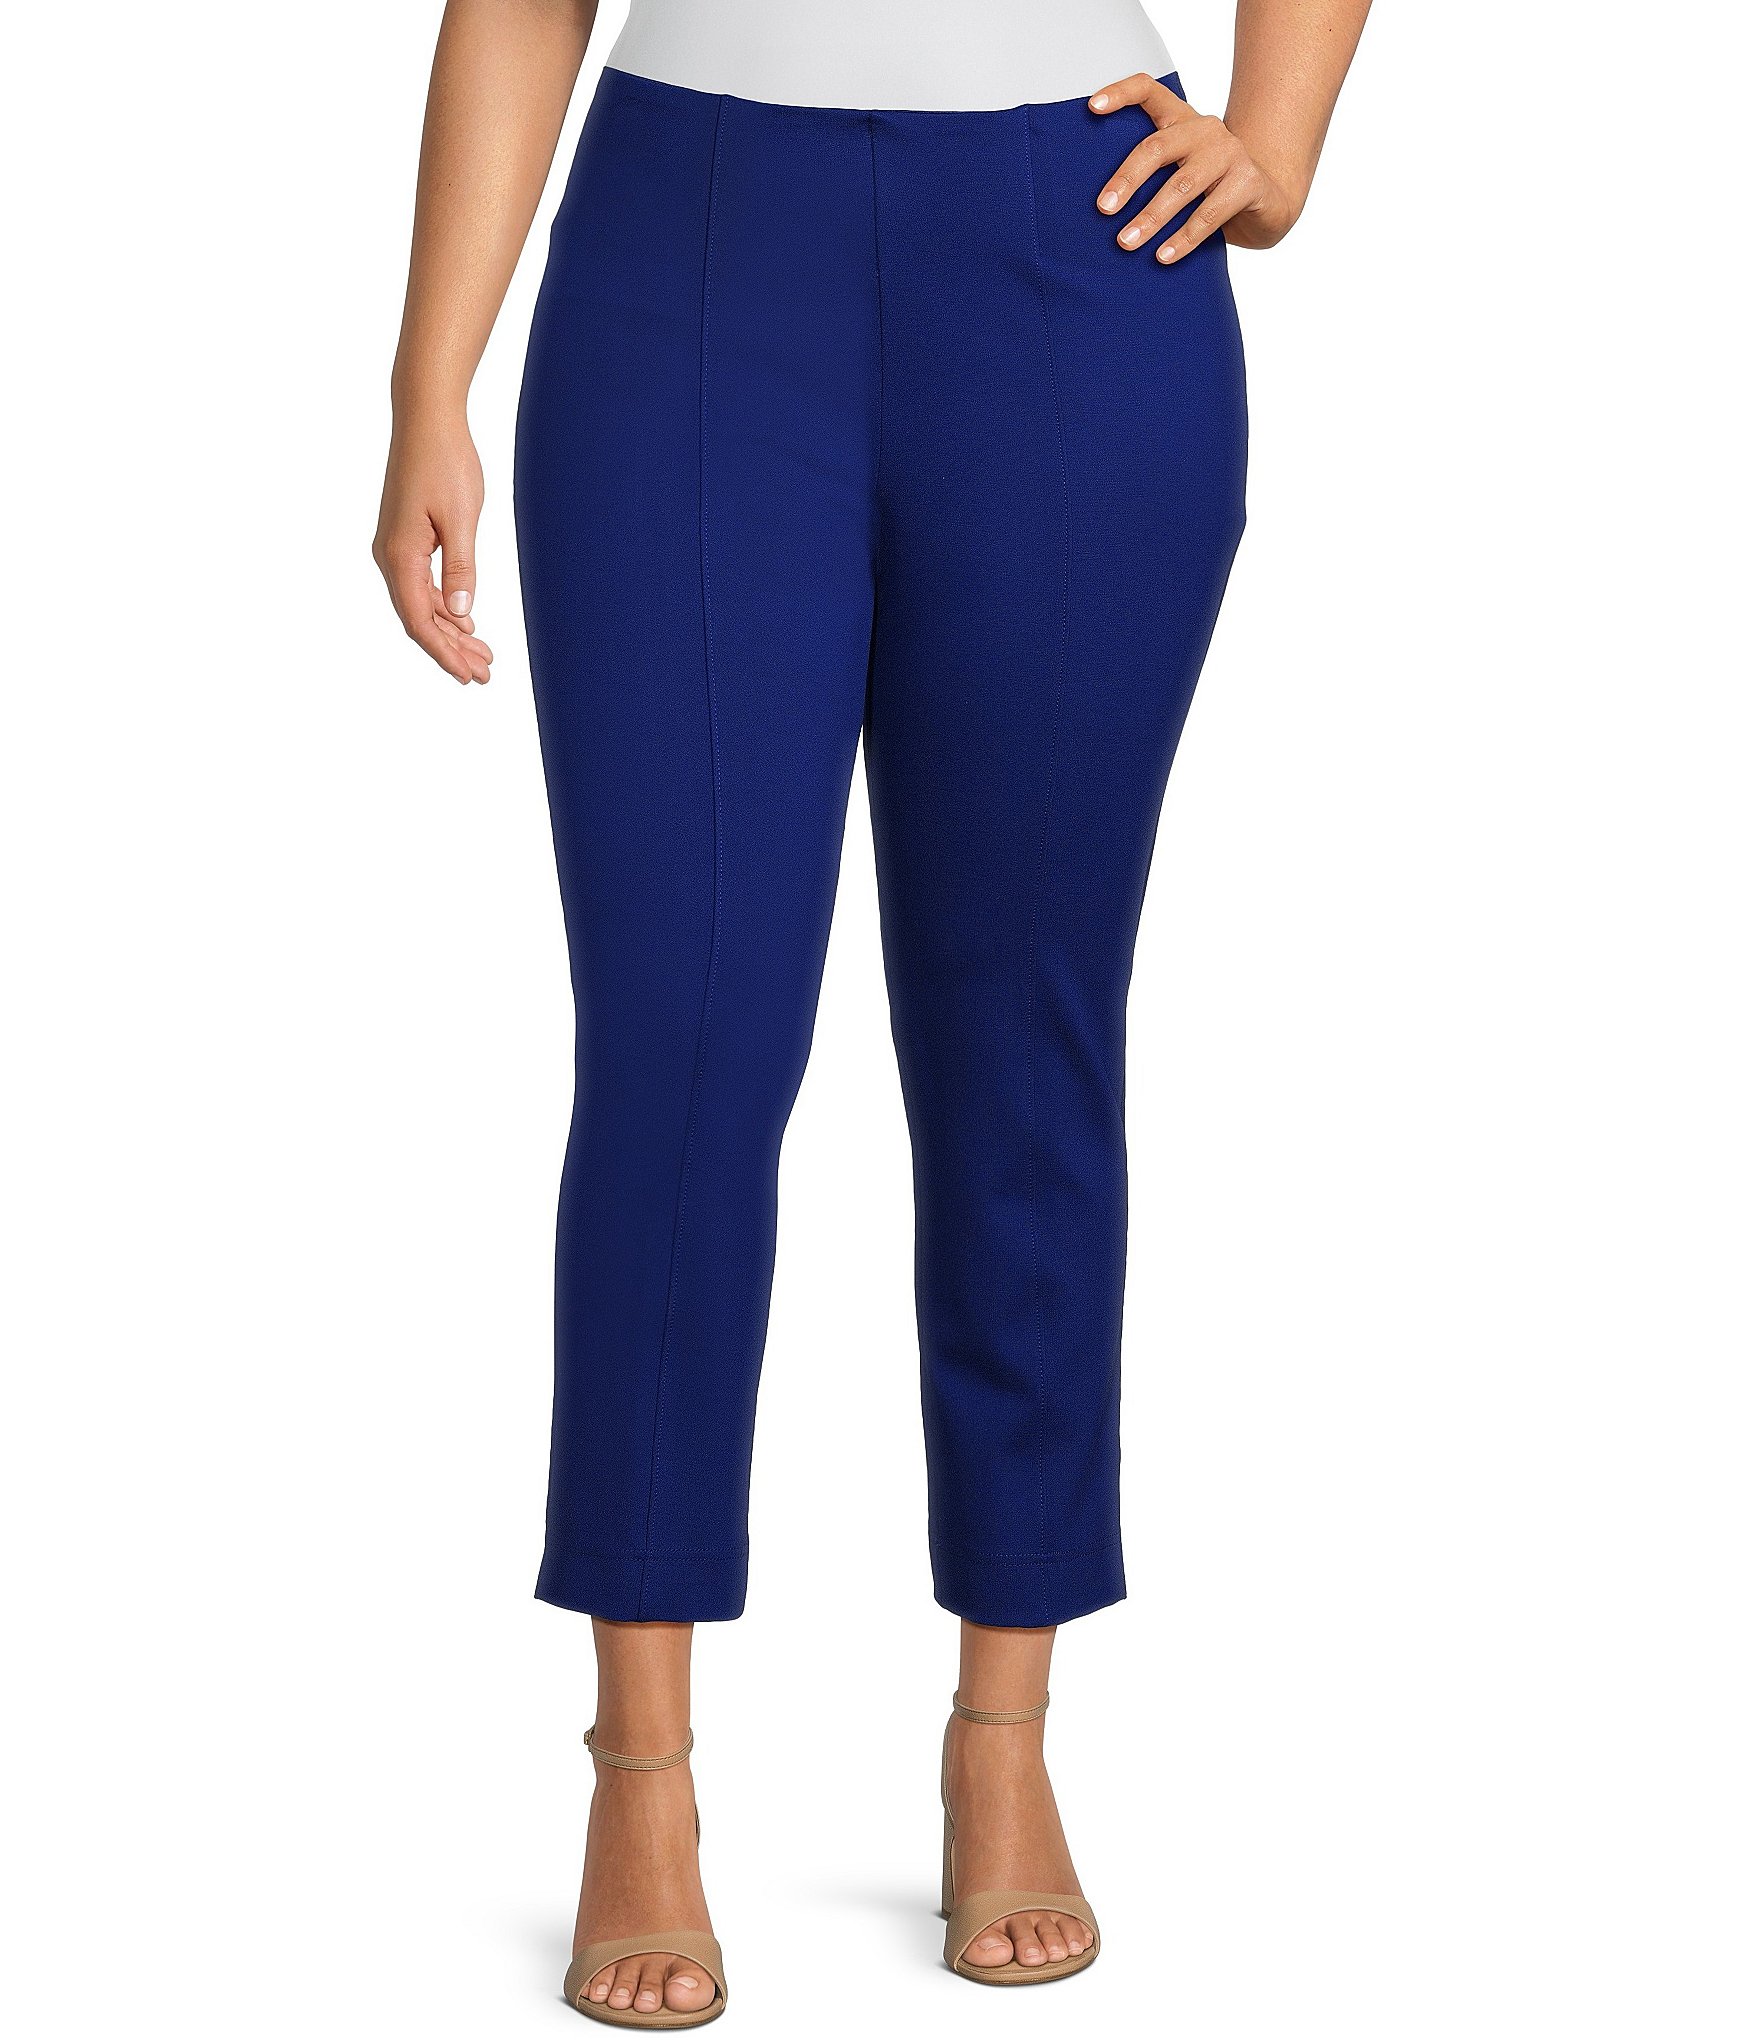 Investments Plus Size Signature Ponte Knit Ankle Pull-On Coordinating Pants